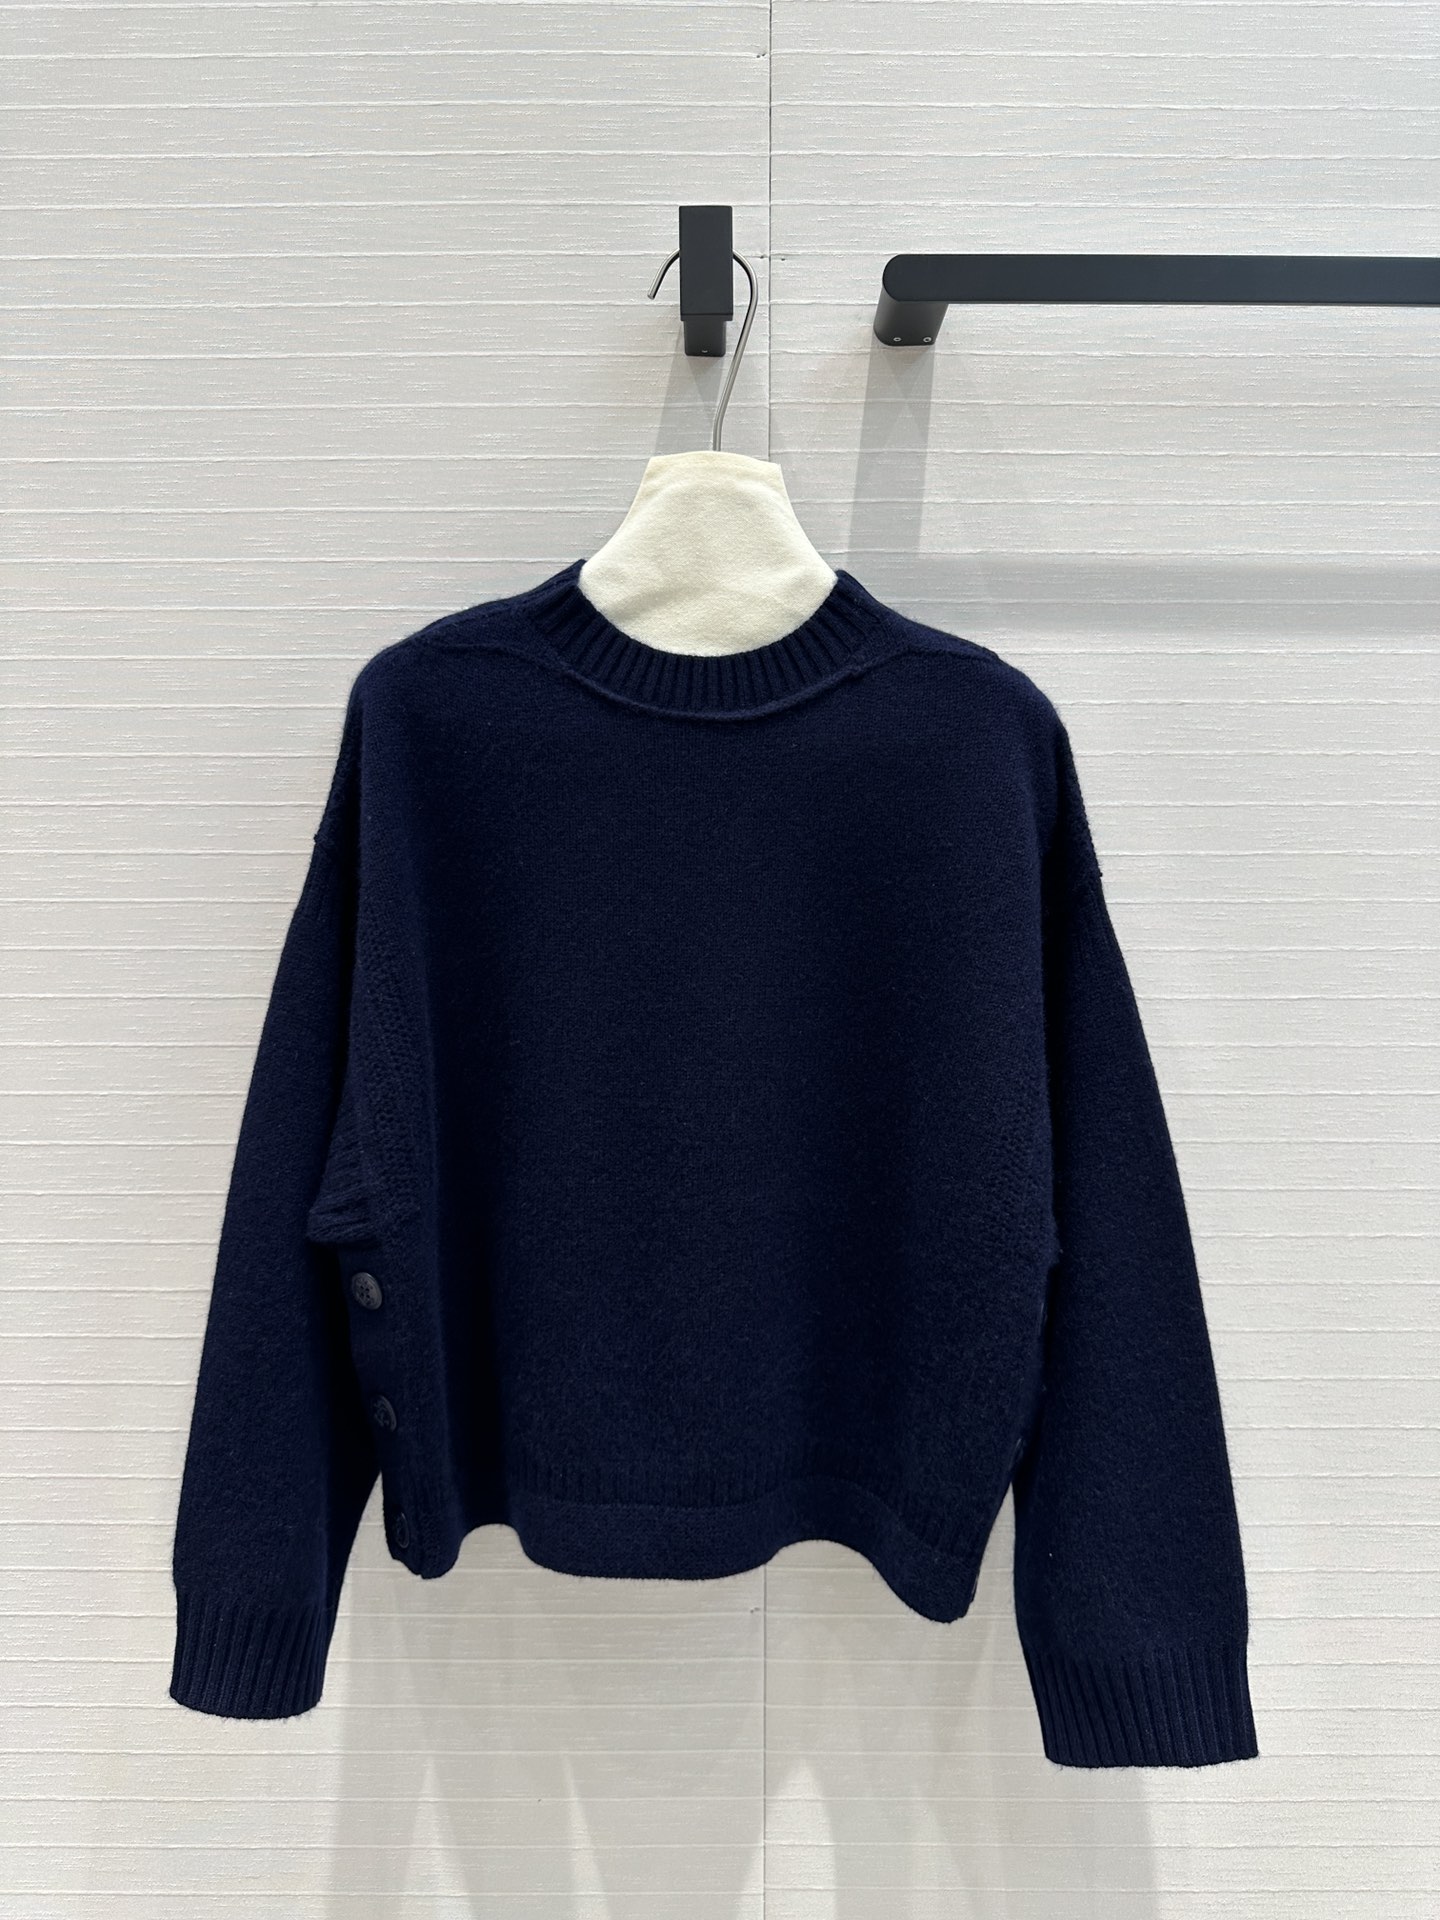 Dior Clothing Knit Sweater Cashmere Knitting Fall Collection